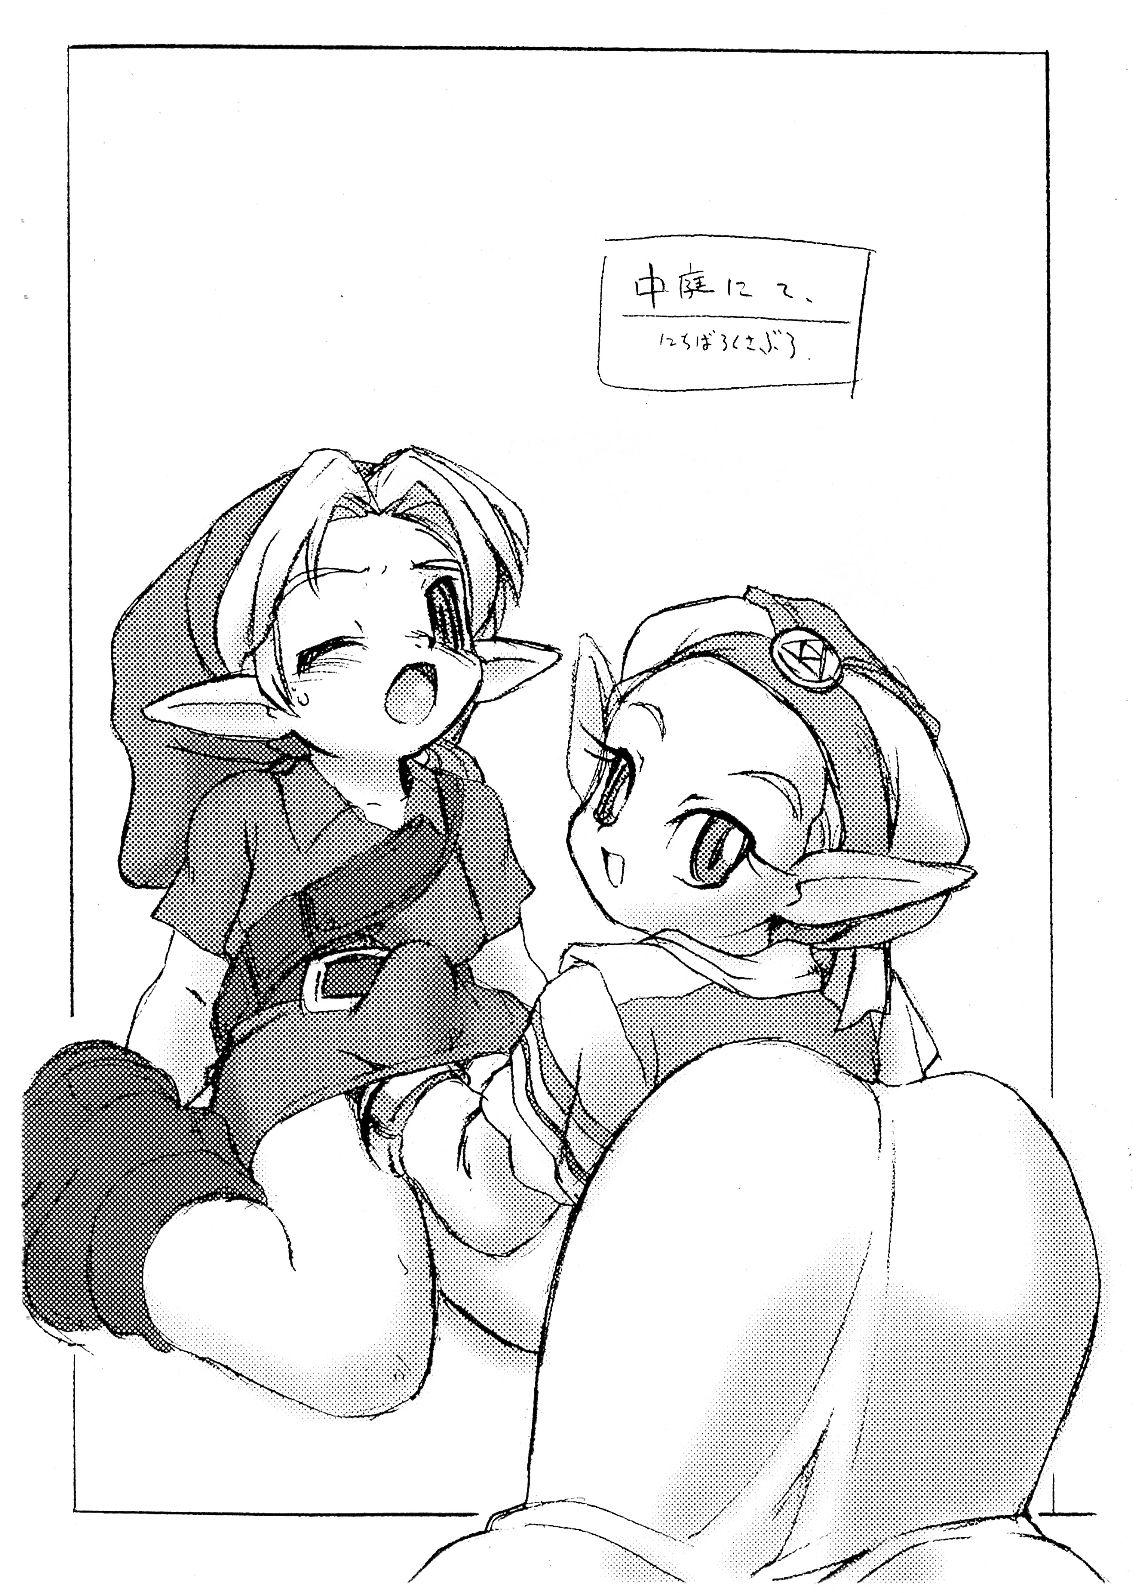 Eurobabe TOUCH DASH! + Omake - The legend of zelda Bakusou kyoudai lets and go Hardcorend - Page 7